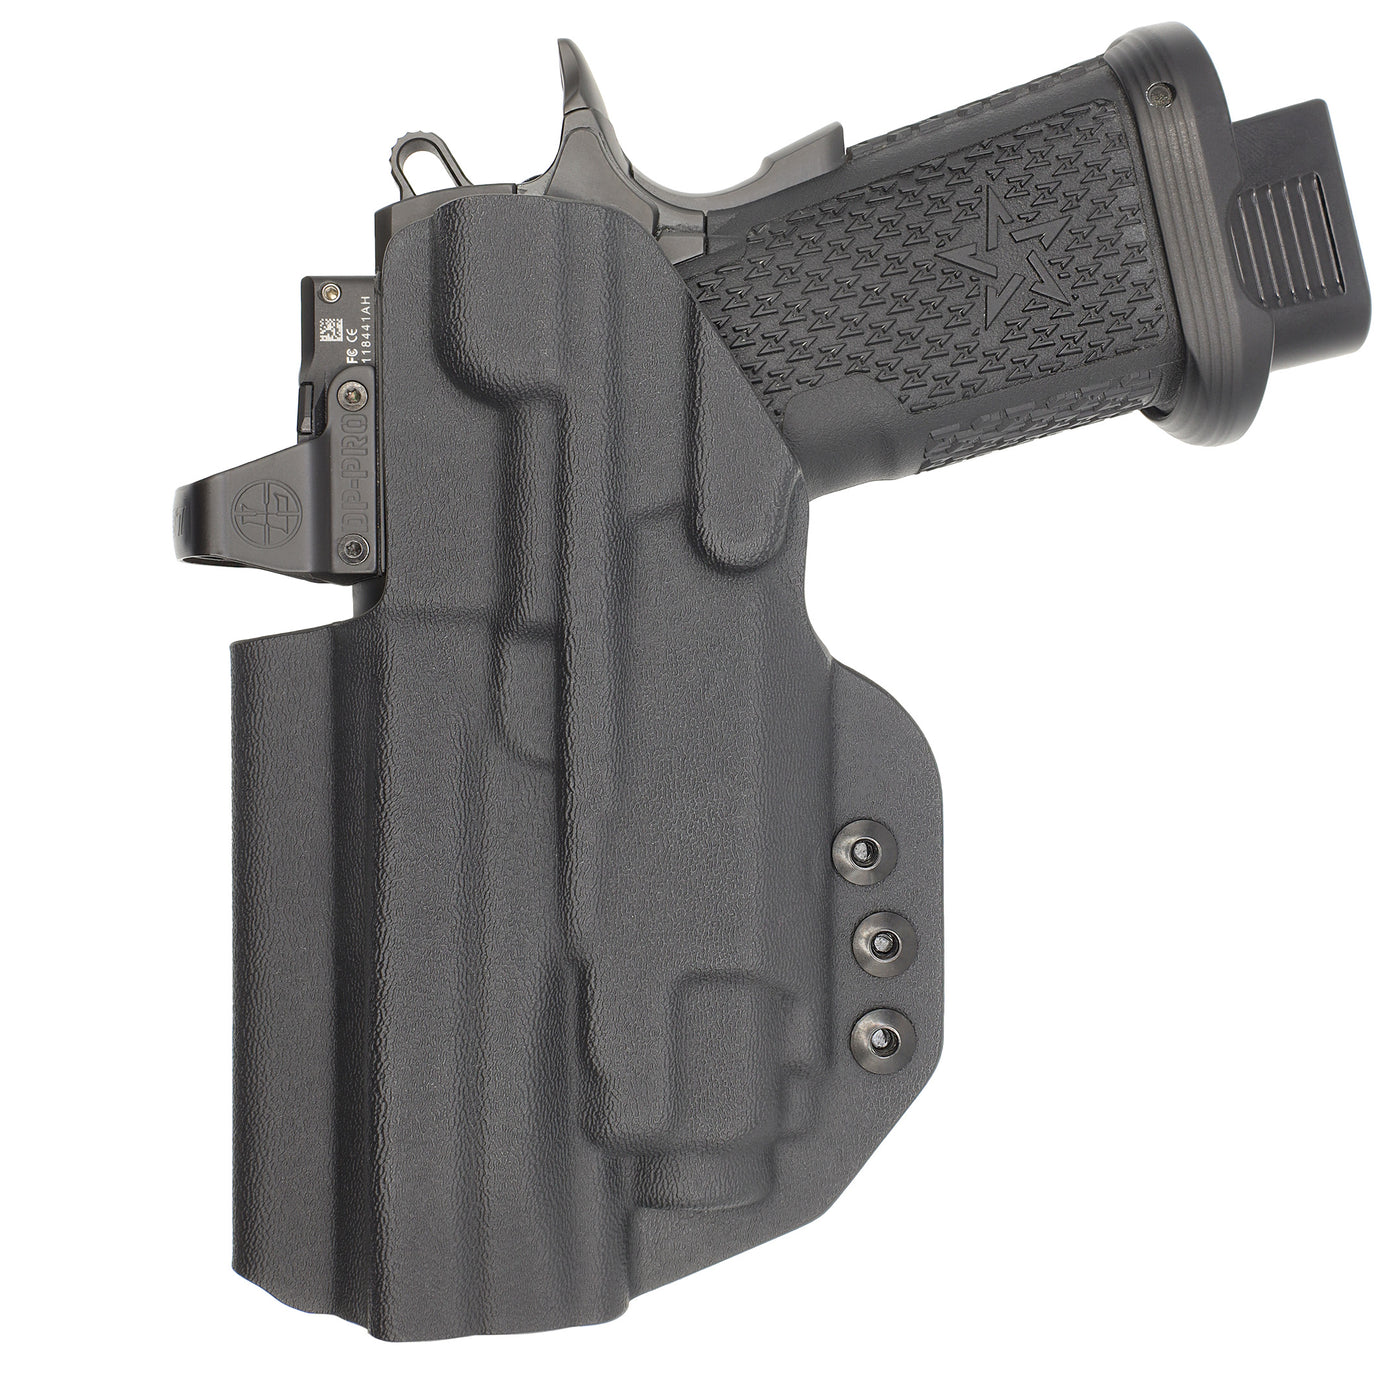 C&G Holsters custom IWB Tactical 1911 streamlight TLR8 holstered back view